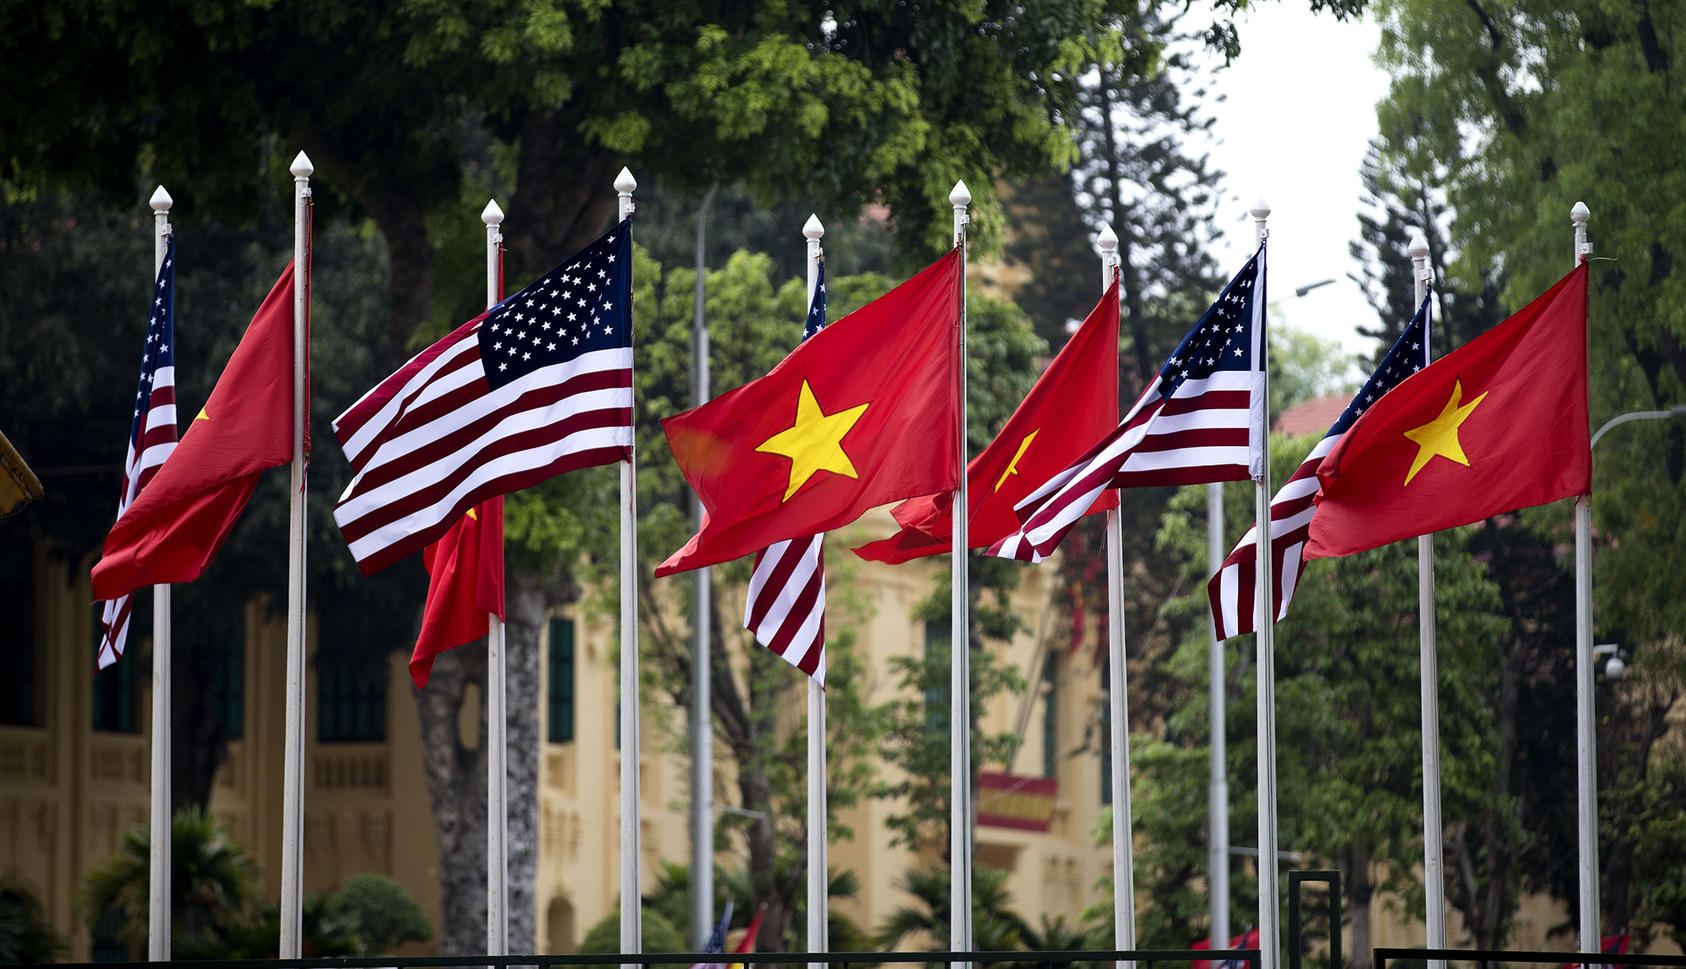 The national flags of Vietnam and the United States fly in Hanoi, Vietnam. May 23, 2016. (Doug Mills/The New York Times)